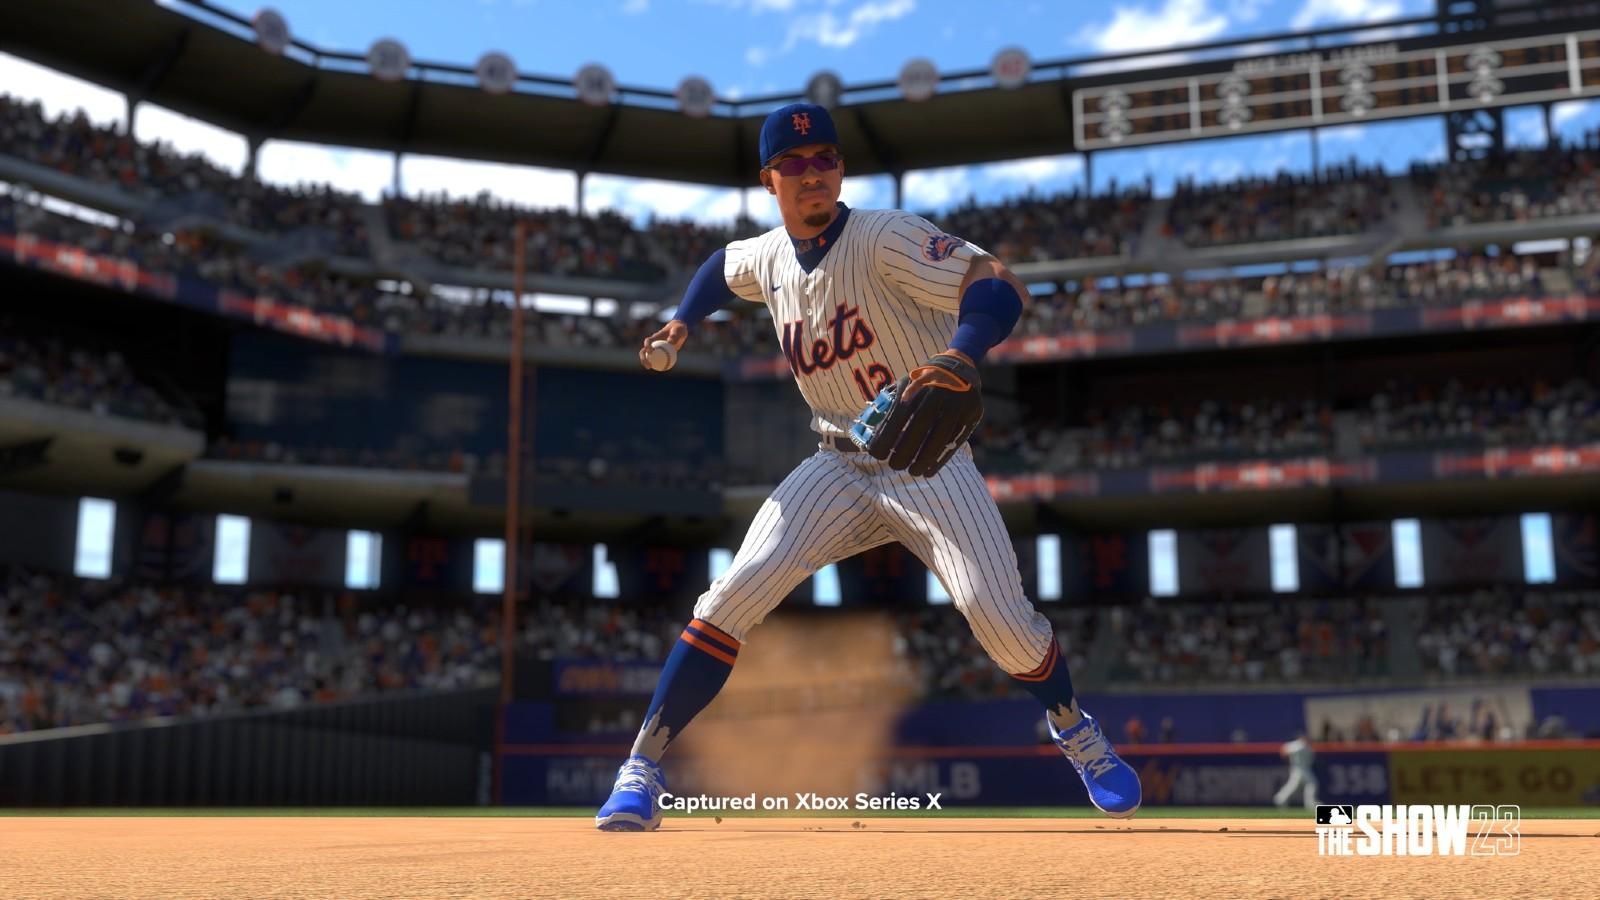 Is MLB The Show 23 coming to PC? - New Baseball Media